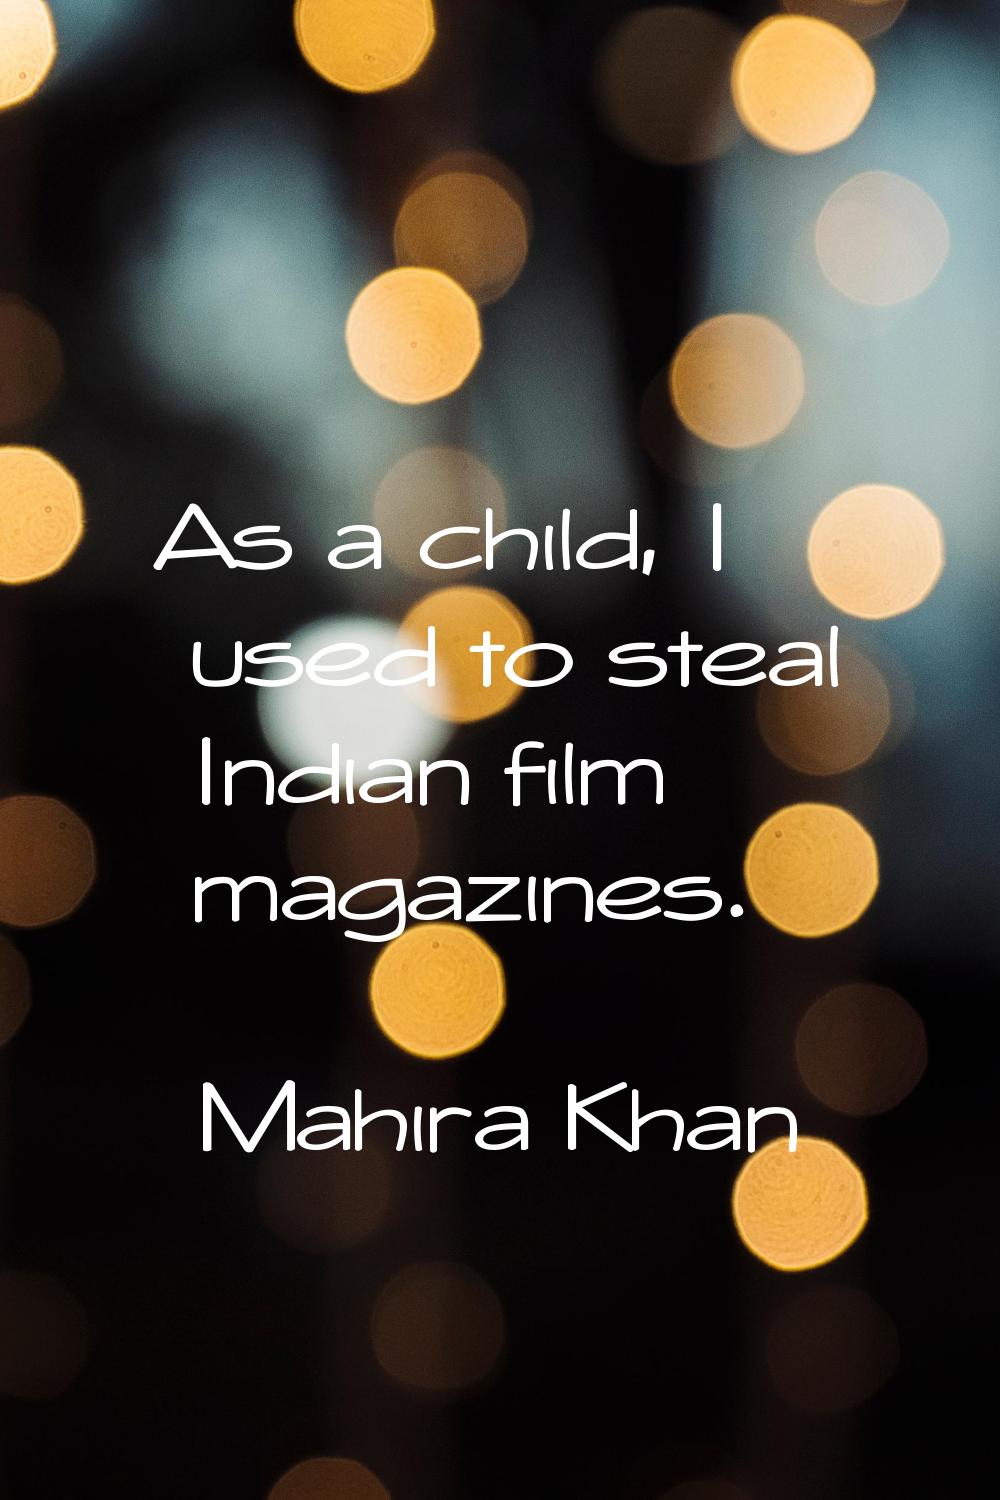 As a child, I used to steal Indian film magazines.